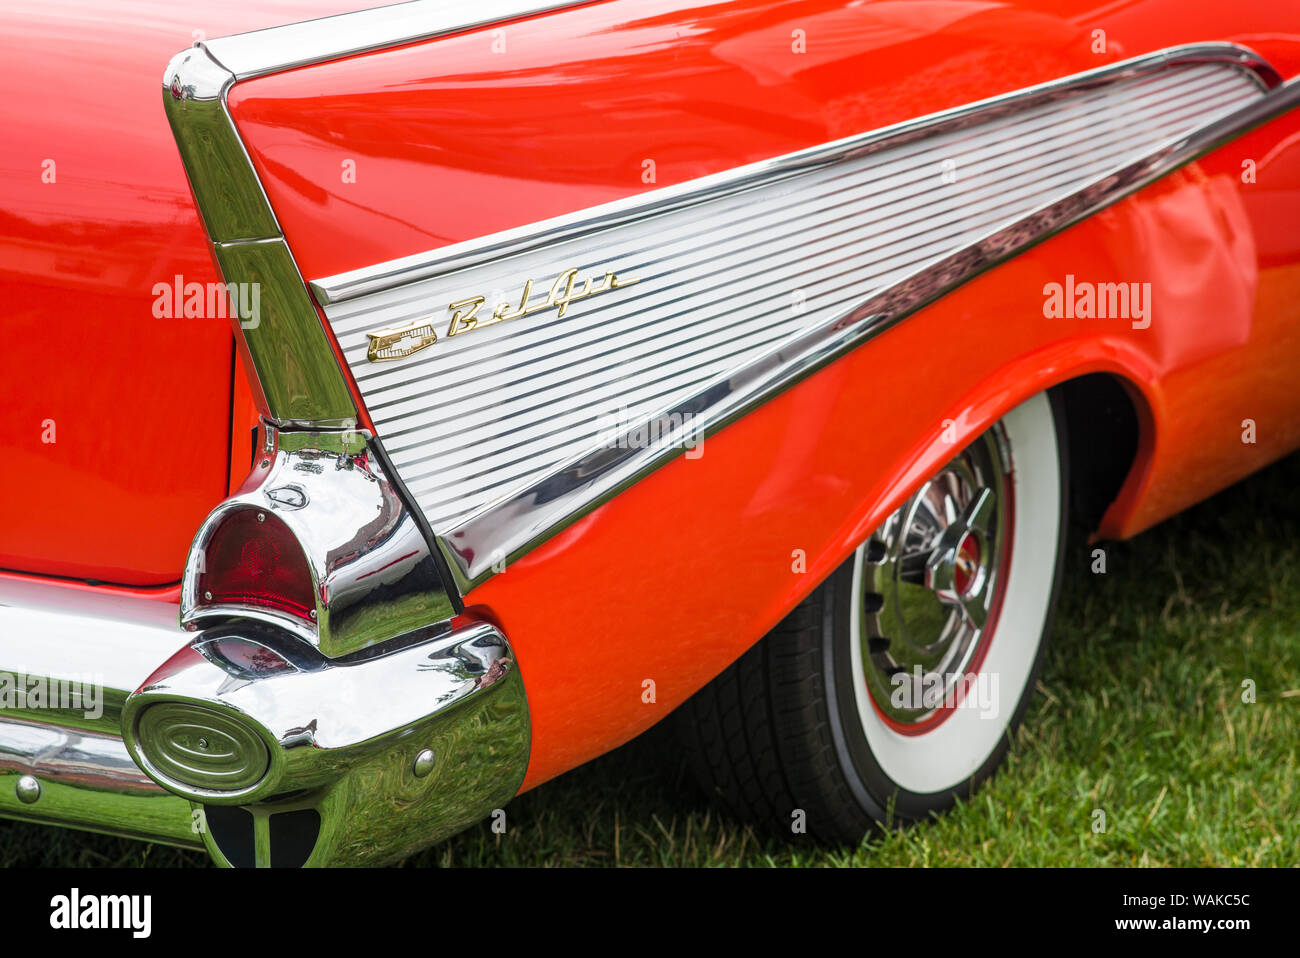 USA, Massachusetts, Beverly. Antique cars, 1957 Chevrolet Bel Air tail fin Stock Photo